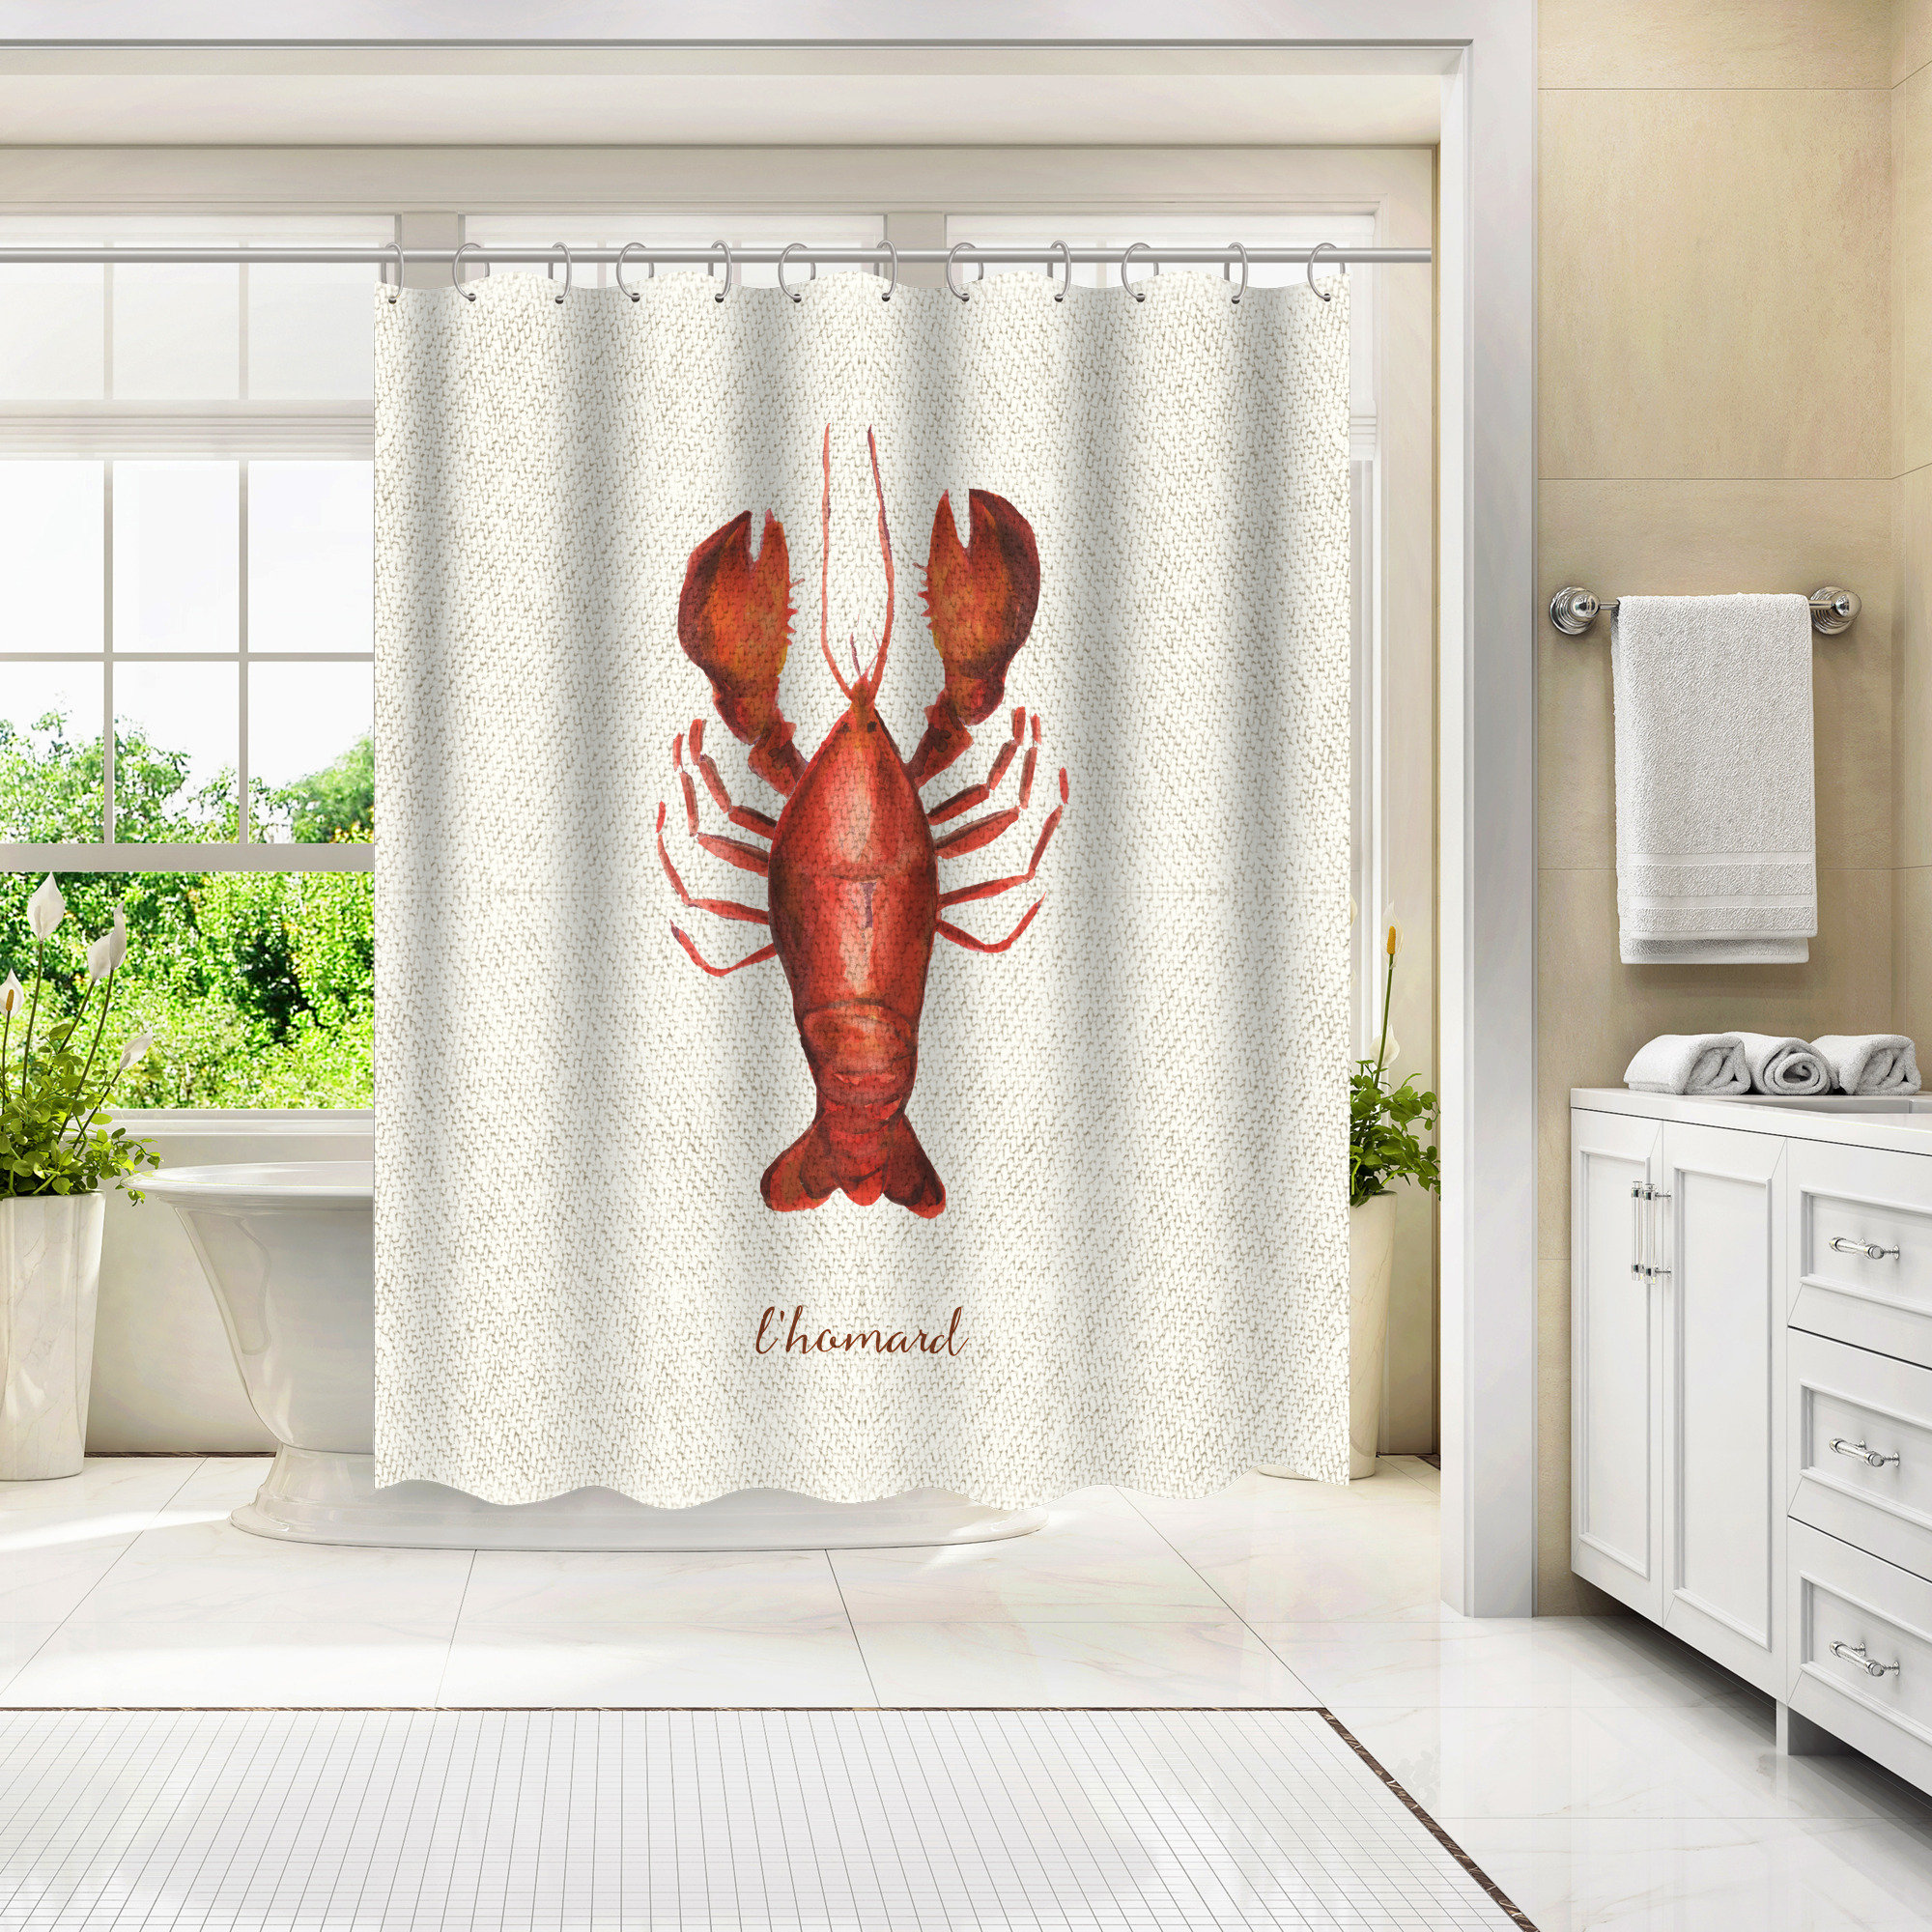 Americanflat 71 x 74 Shower Curtain, French Kitchen Seafood